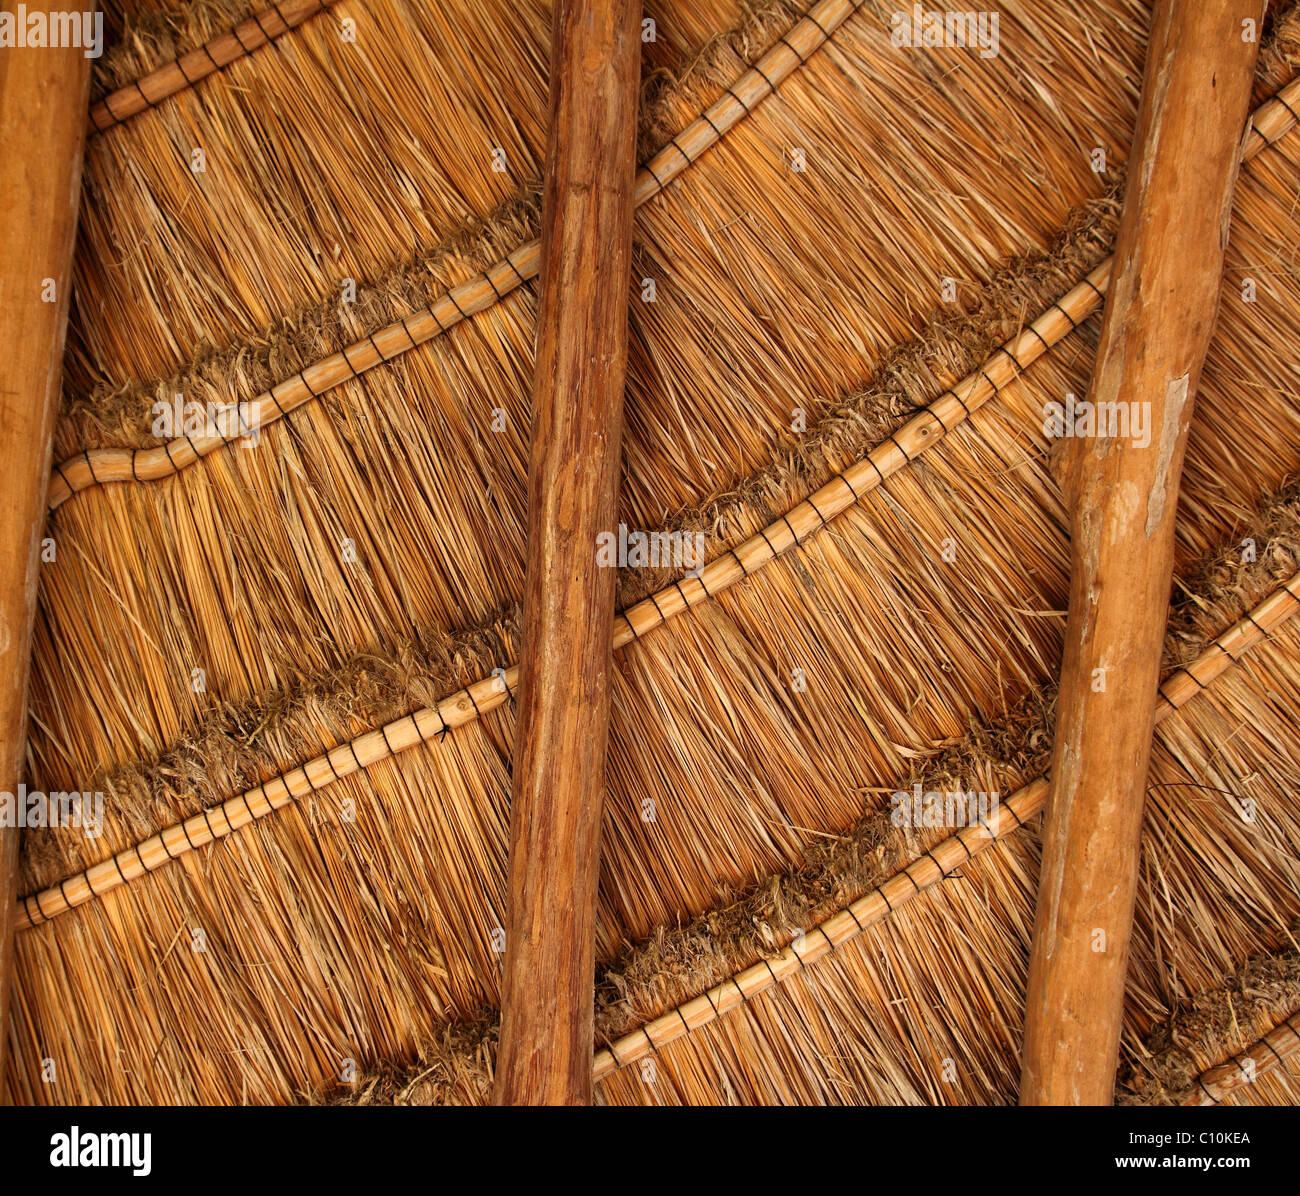 palapa tropical Mexico wood cabin roof detail indoor Stock Photo